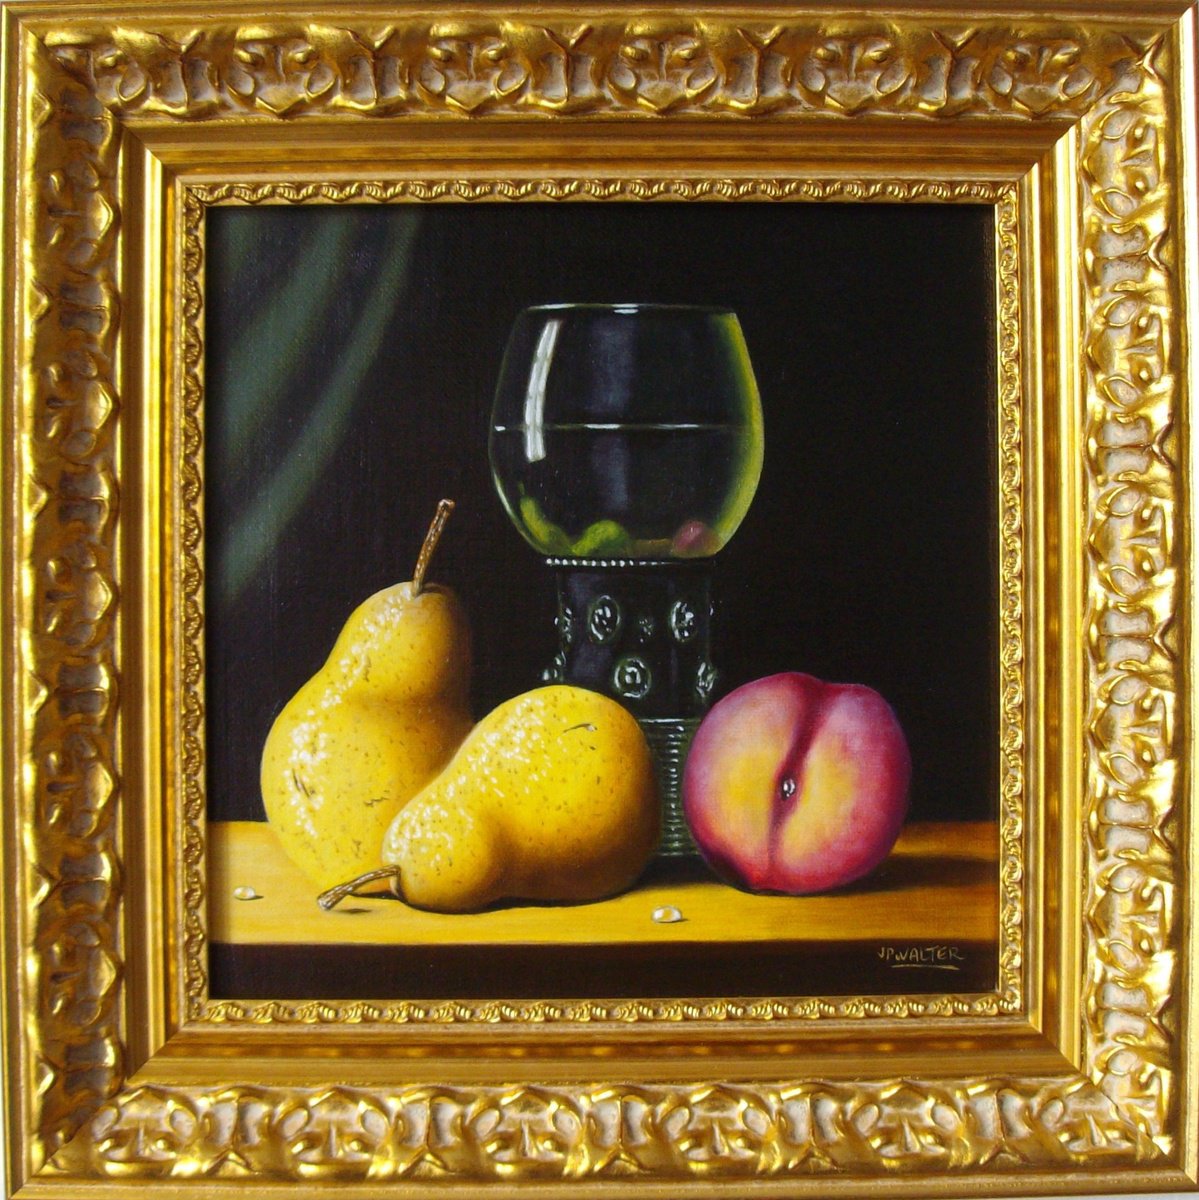 Antique glass with pears and peach by Jean-Pierre Walter